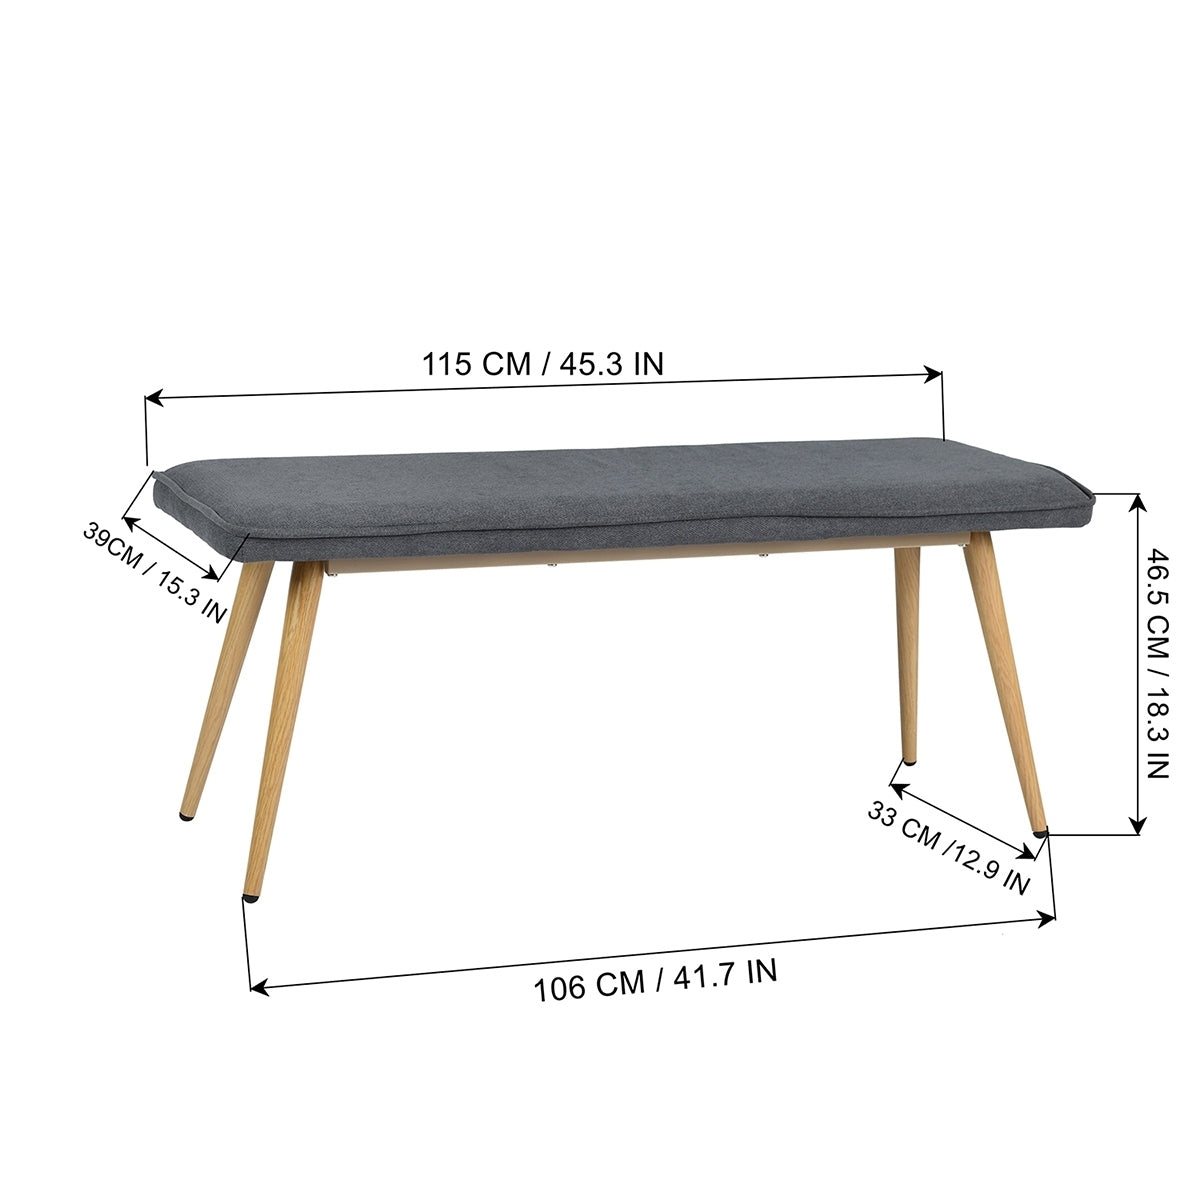 45.3" Dining Room Bench with Metal Legs - CHARCOAL